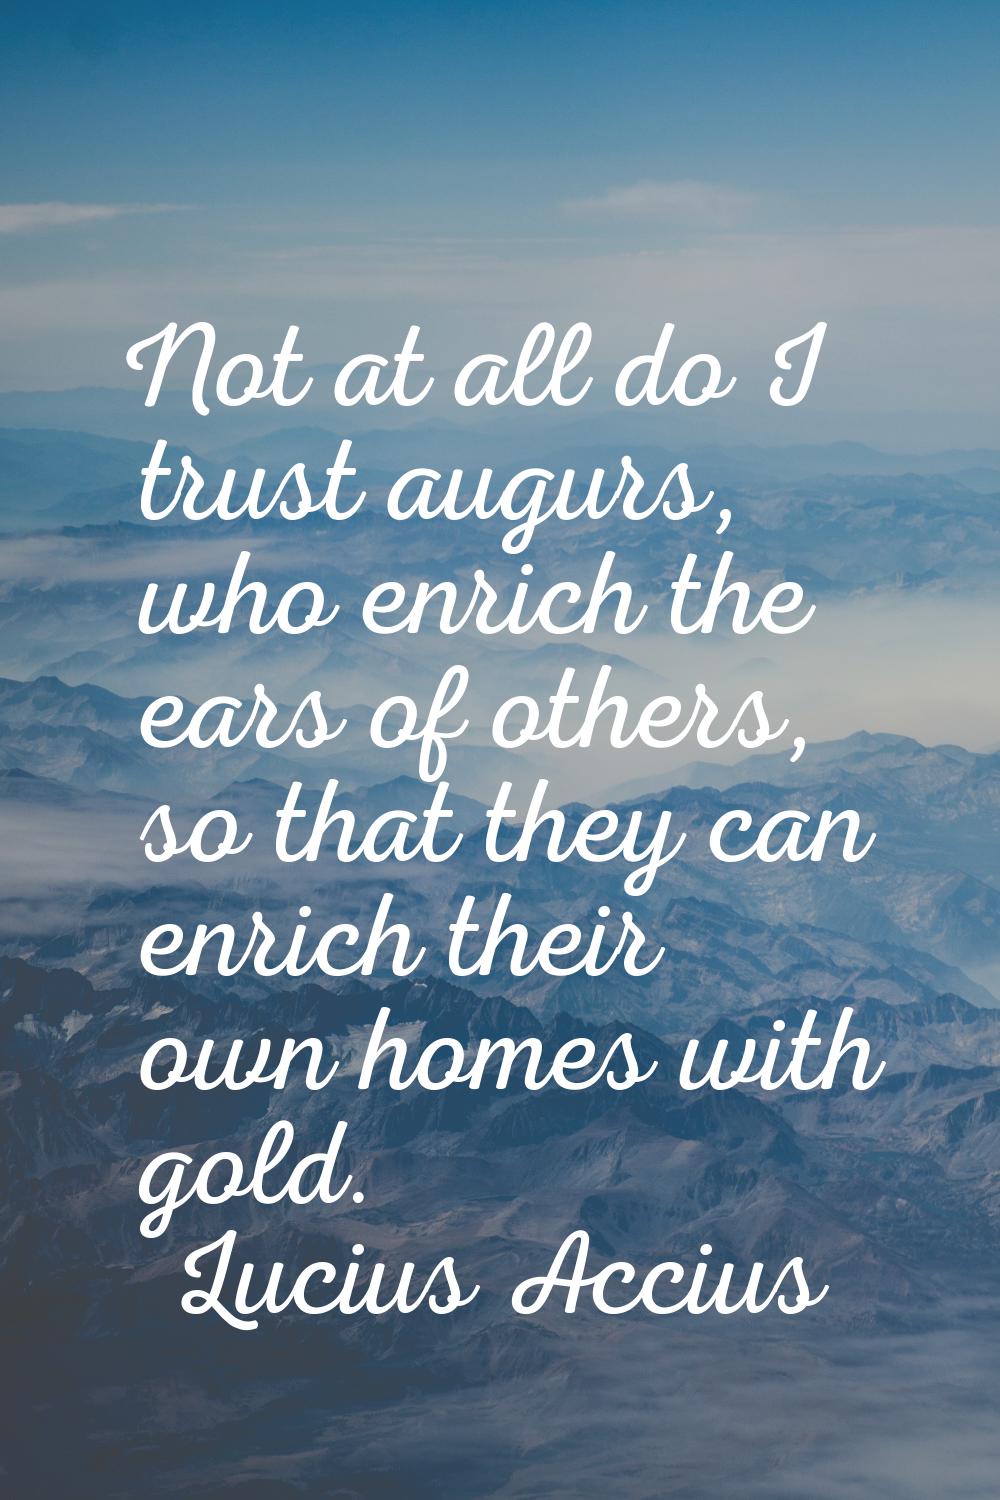 Not at all do I trust augurs, who enrich the ears of others, so that they can enrich their own home